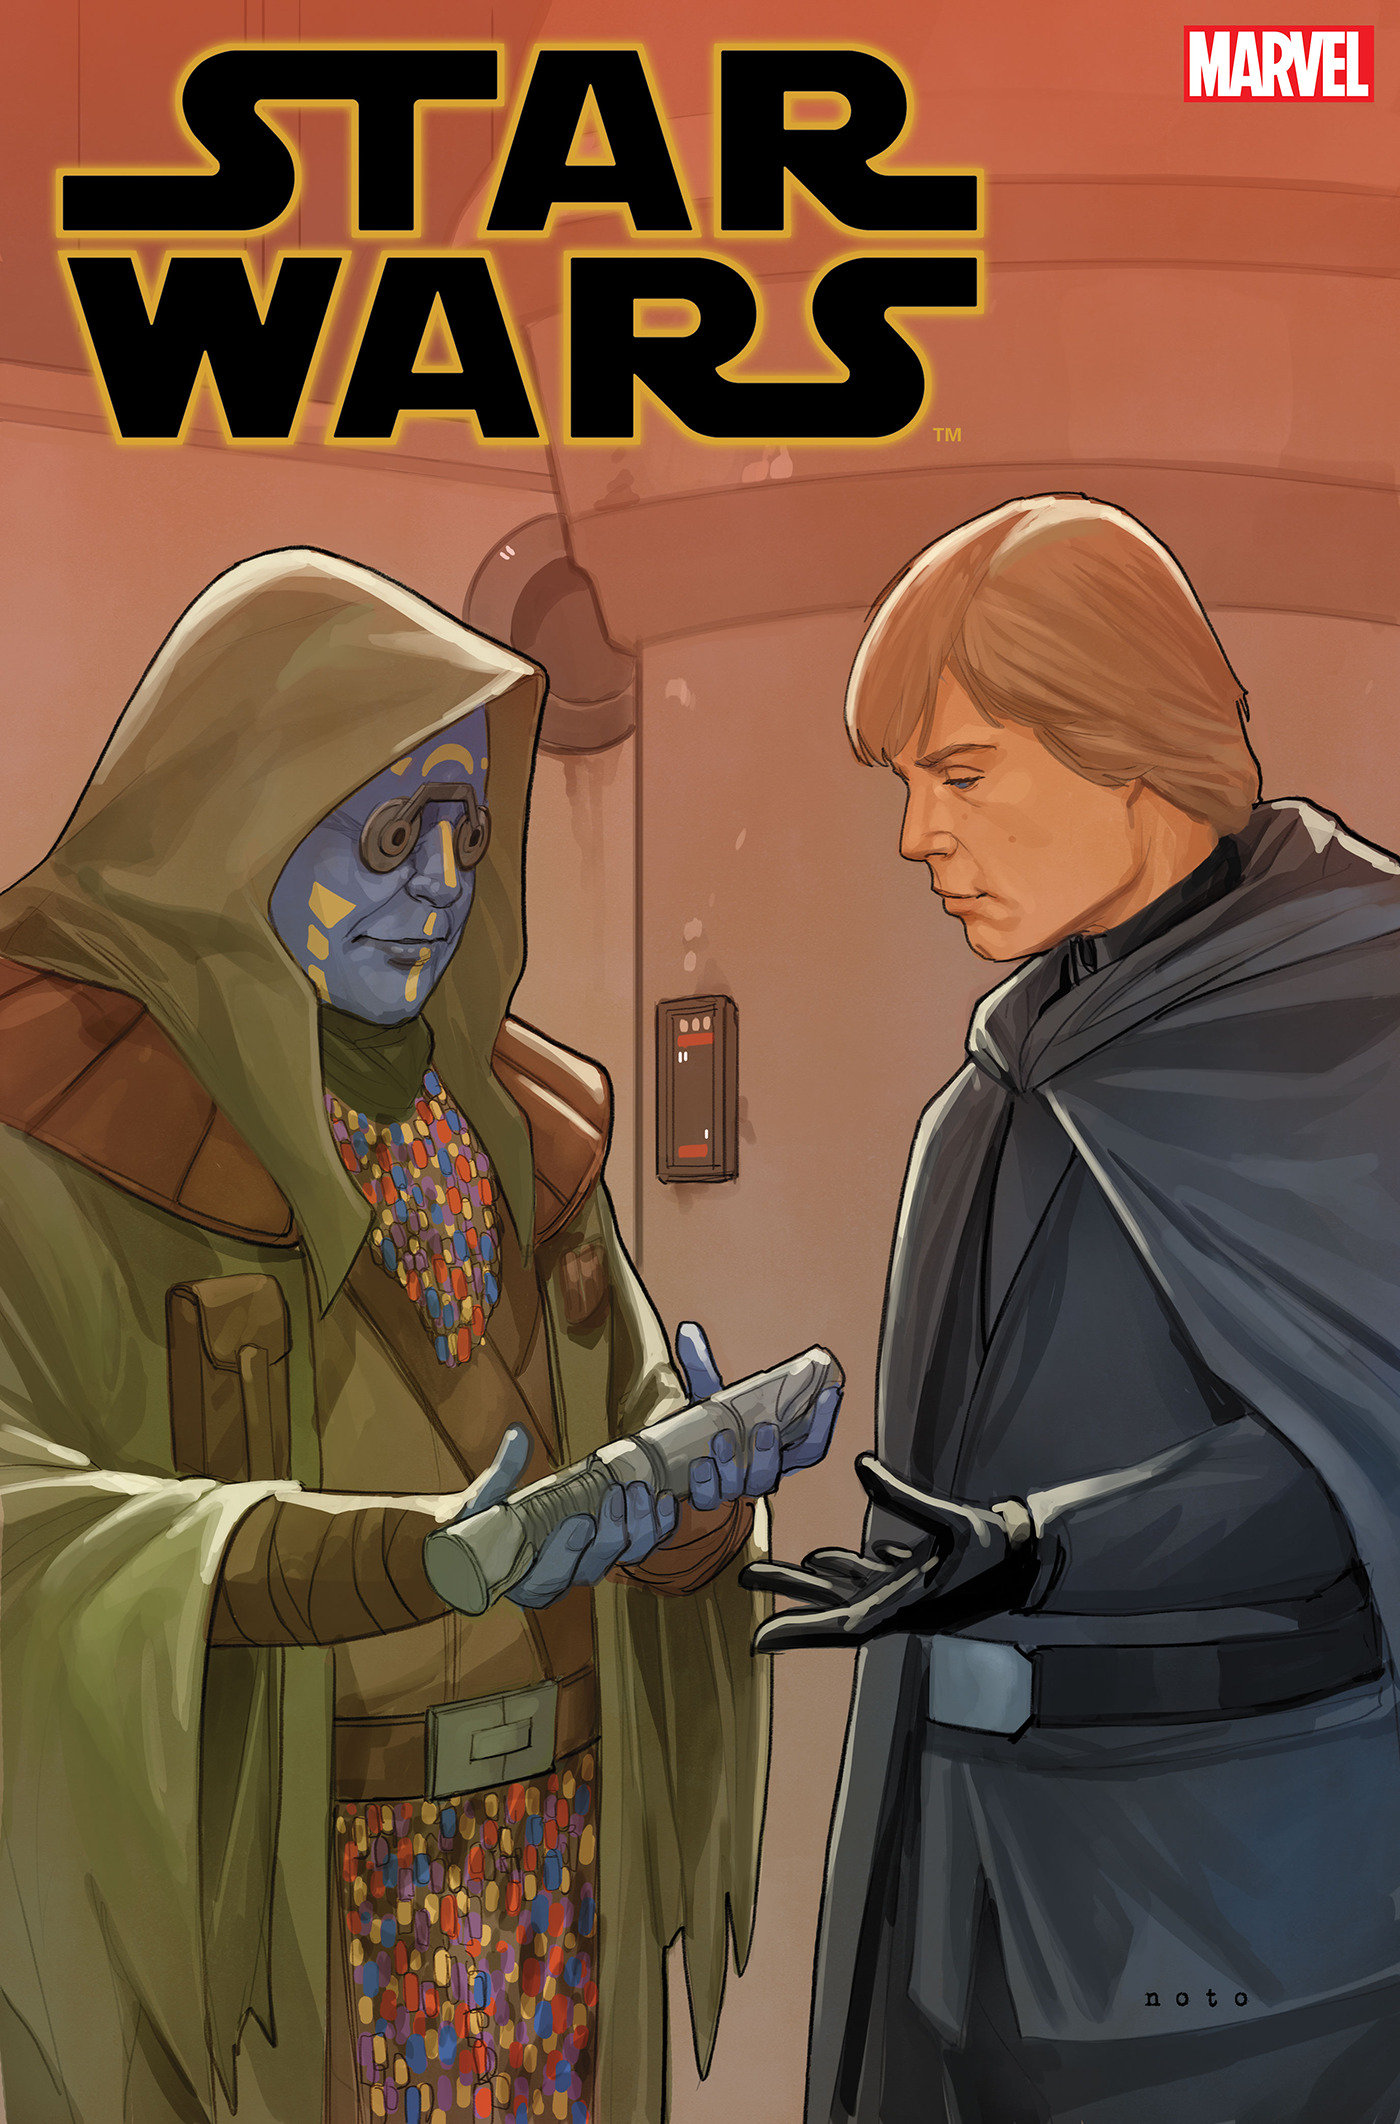 Star Wars #35 1 for 25 Incentive Phil Noto Variant